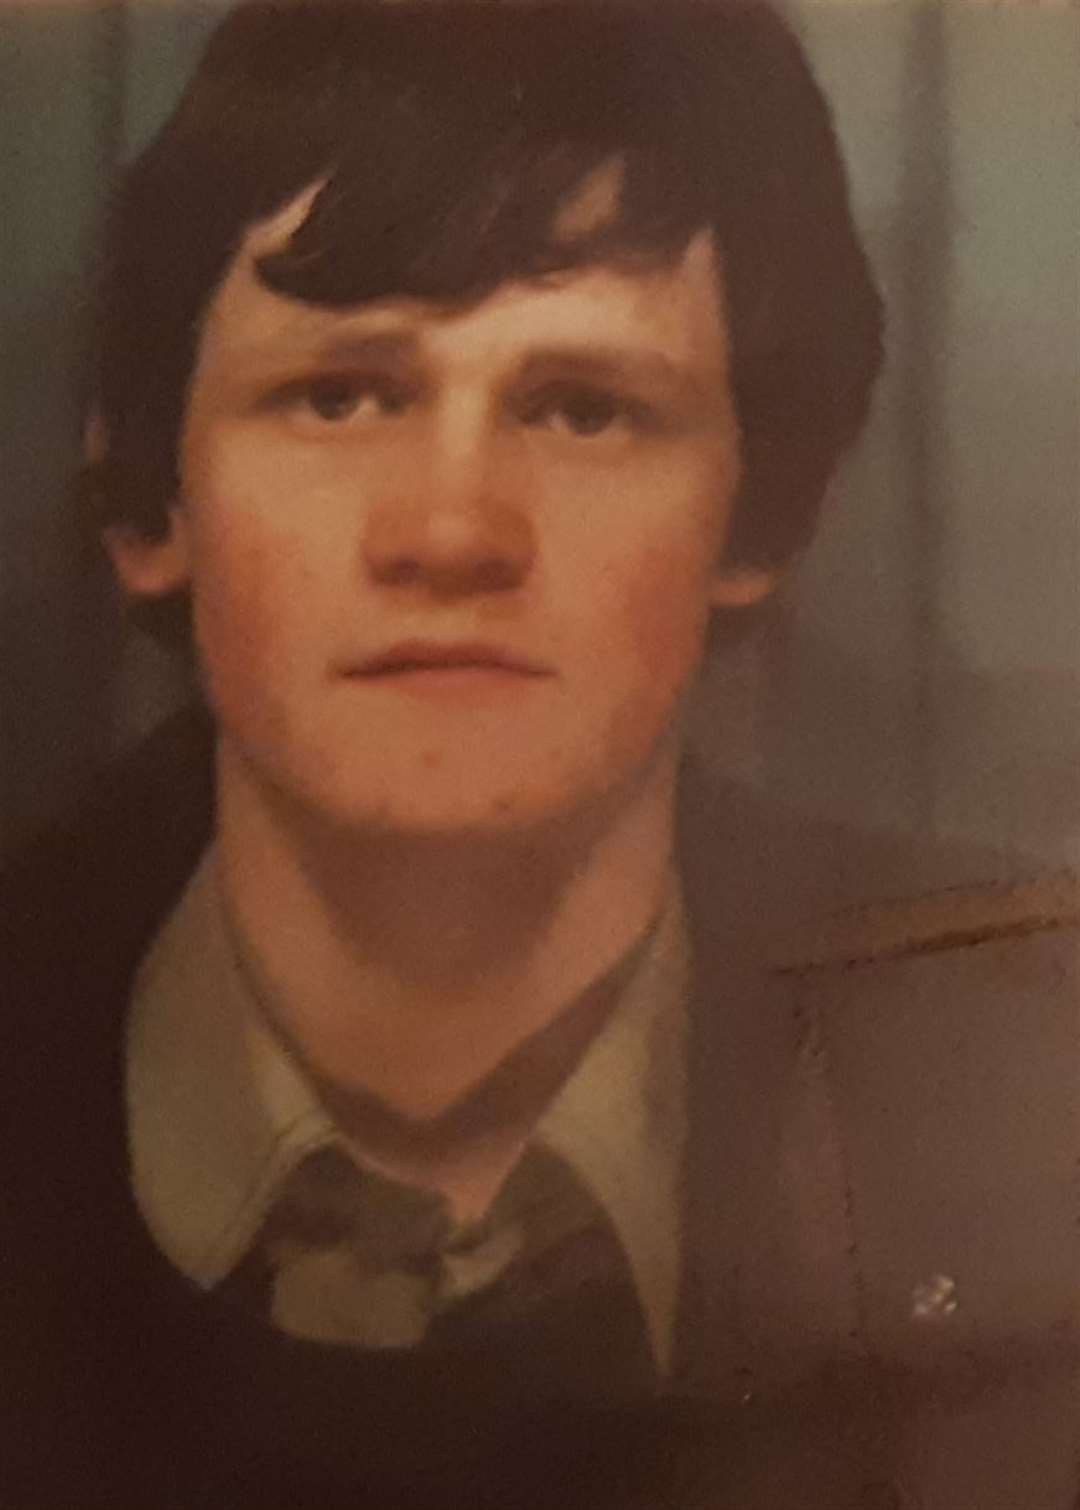 Sam Lennon, aged 16 at the time of the shooting